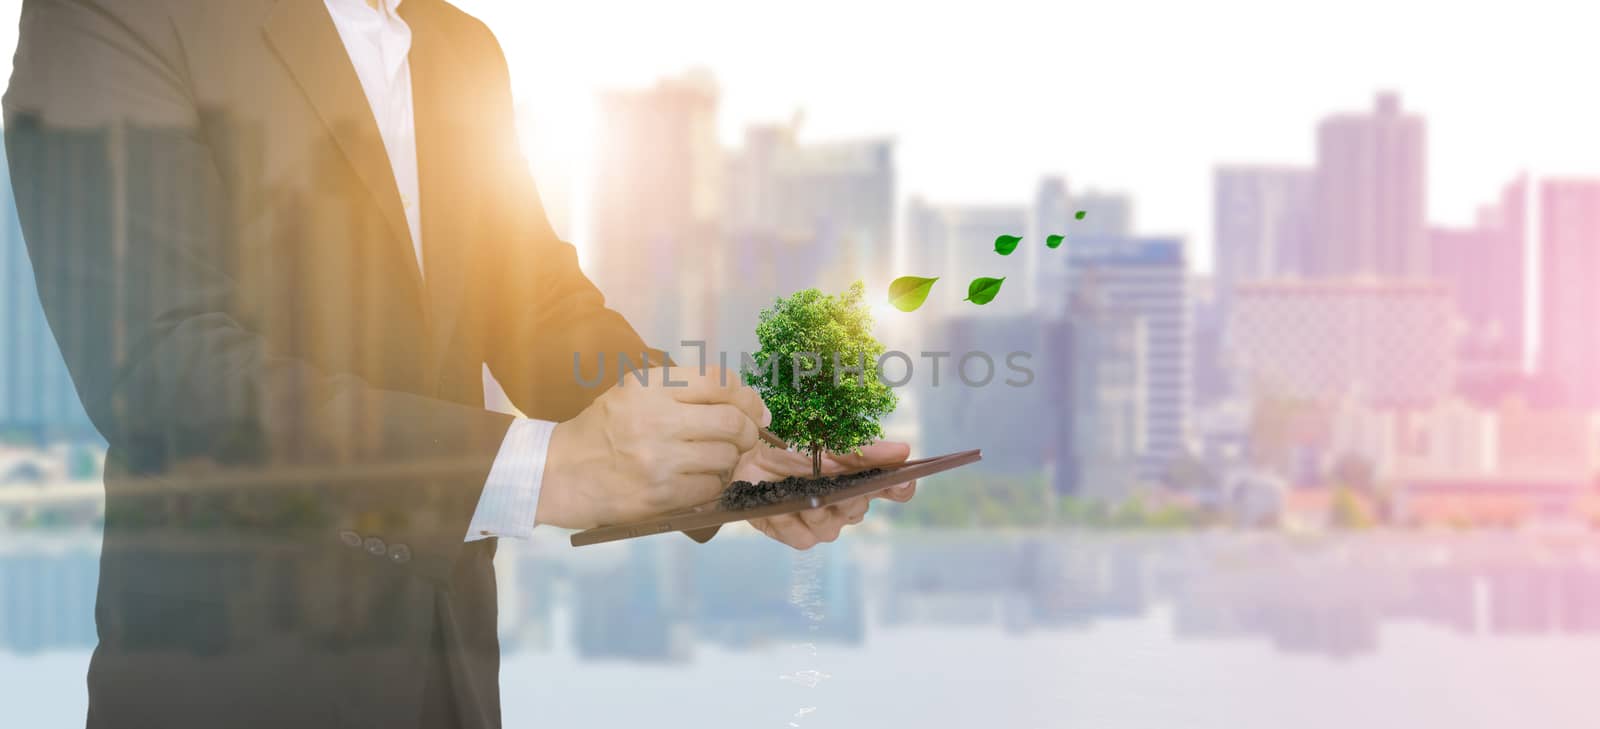 Ecology and businessmen hold tablet planting trees Urban environment by sompongtom